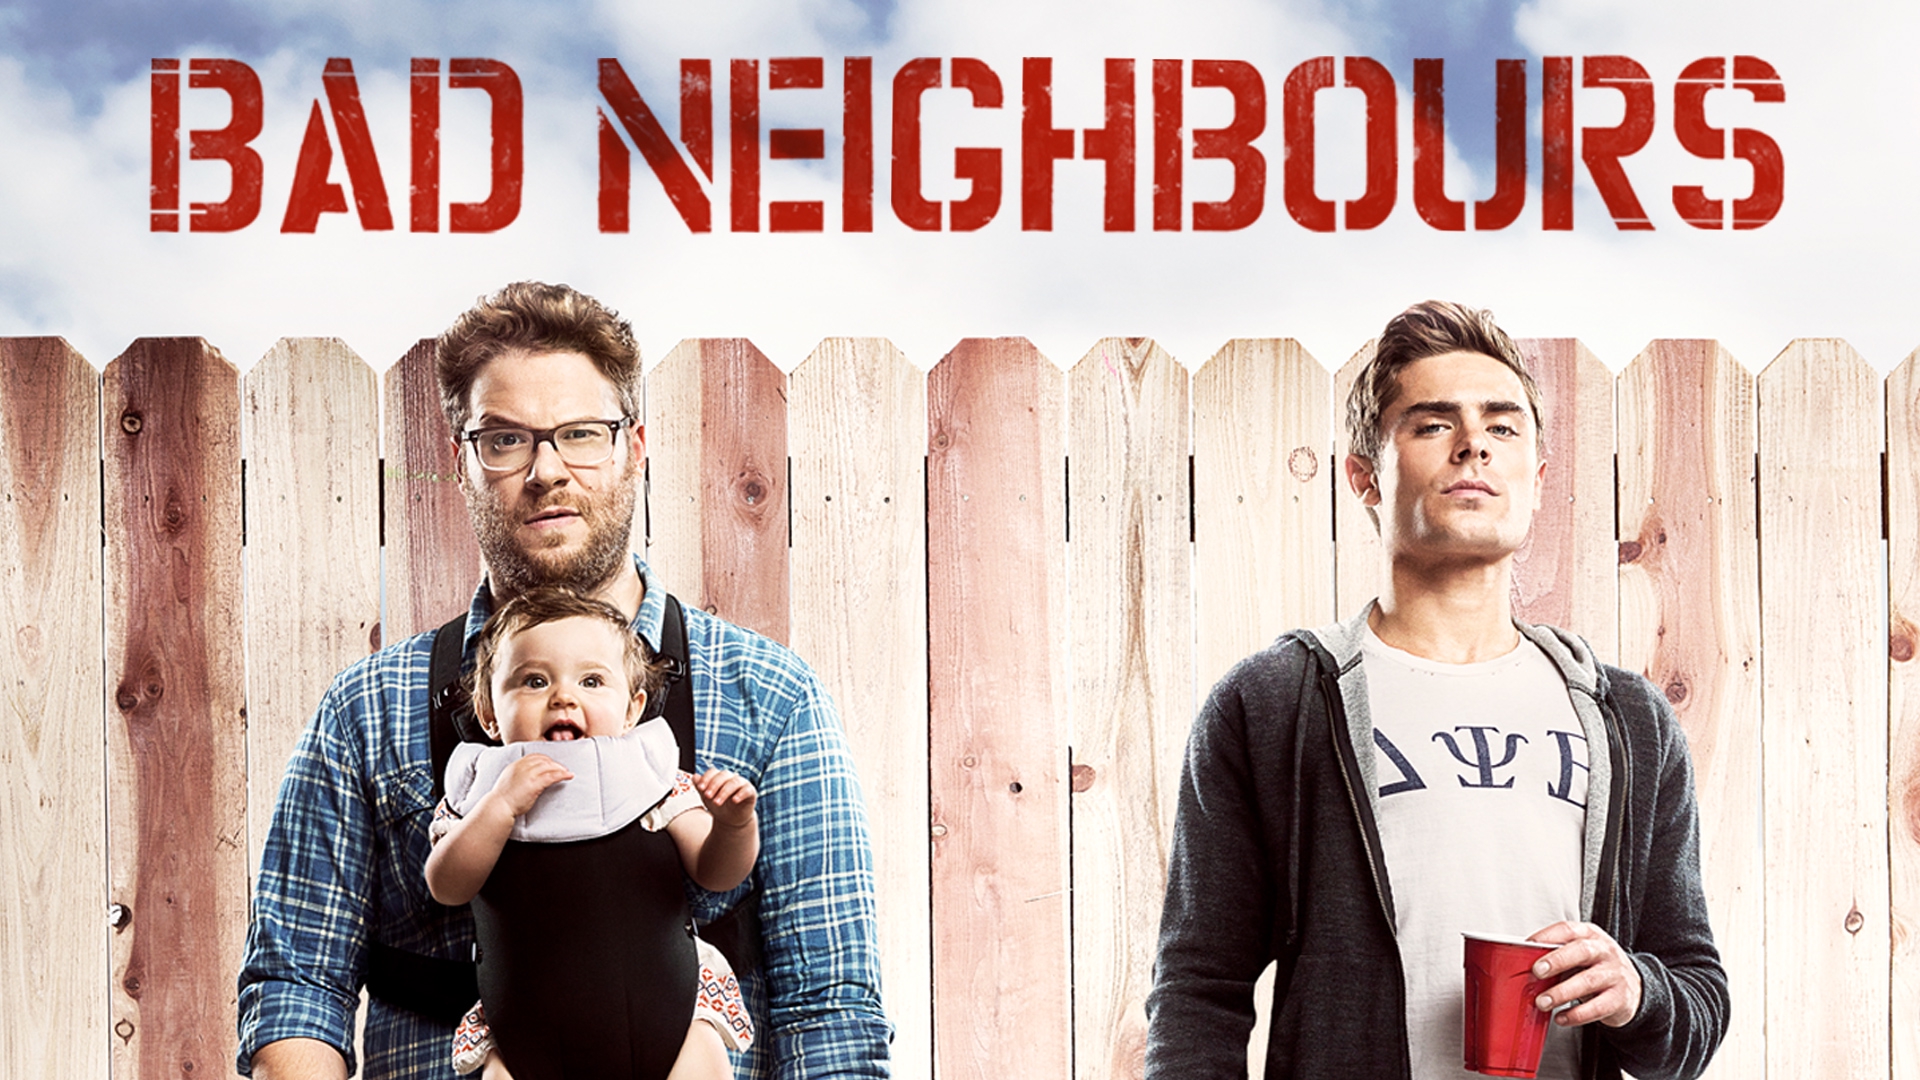 stream-bad-neighbours-online-download-and-watch-hd-movies-stan